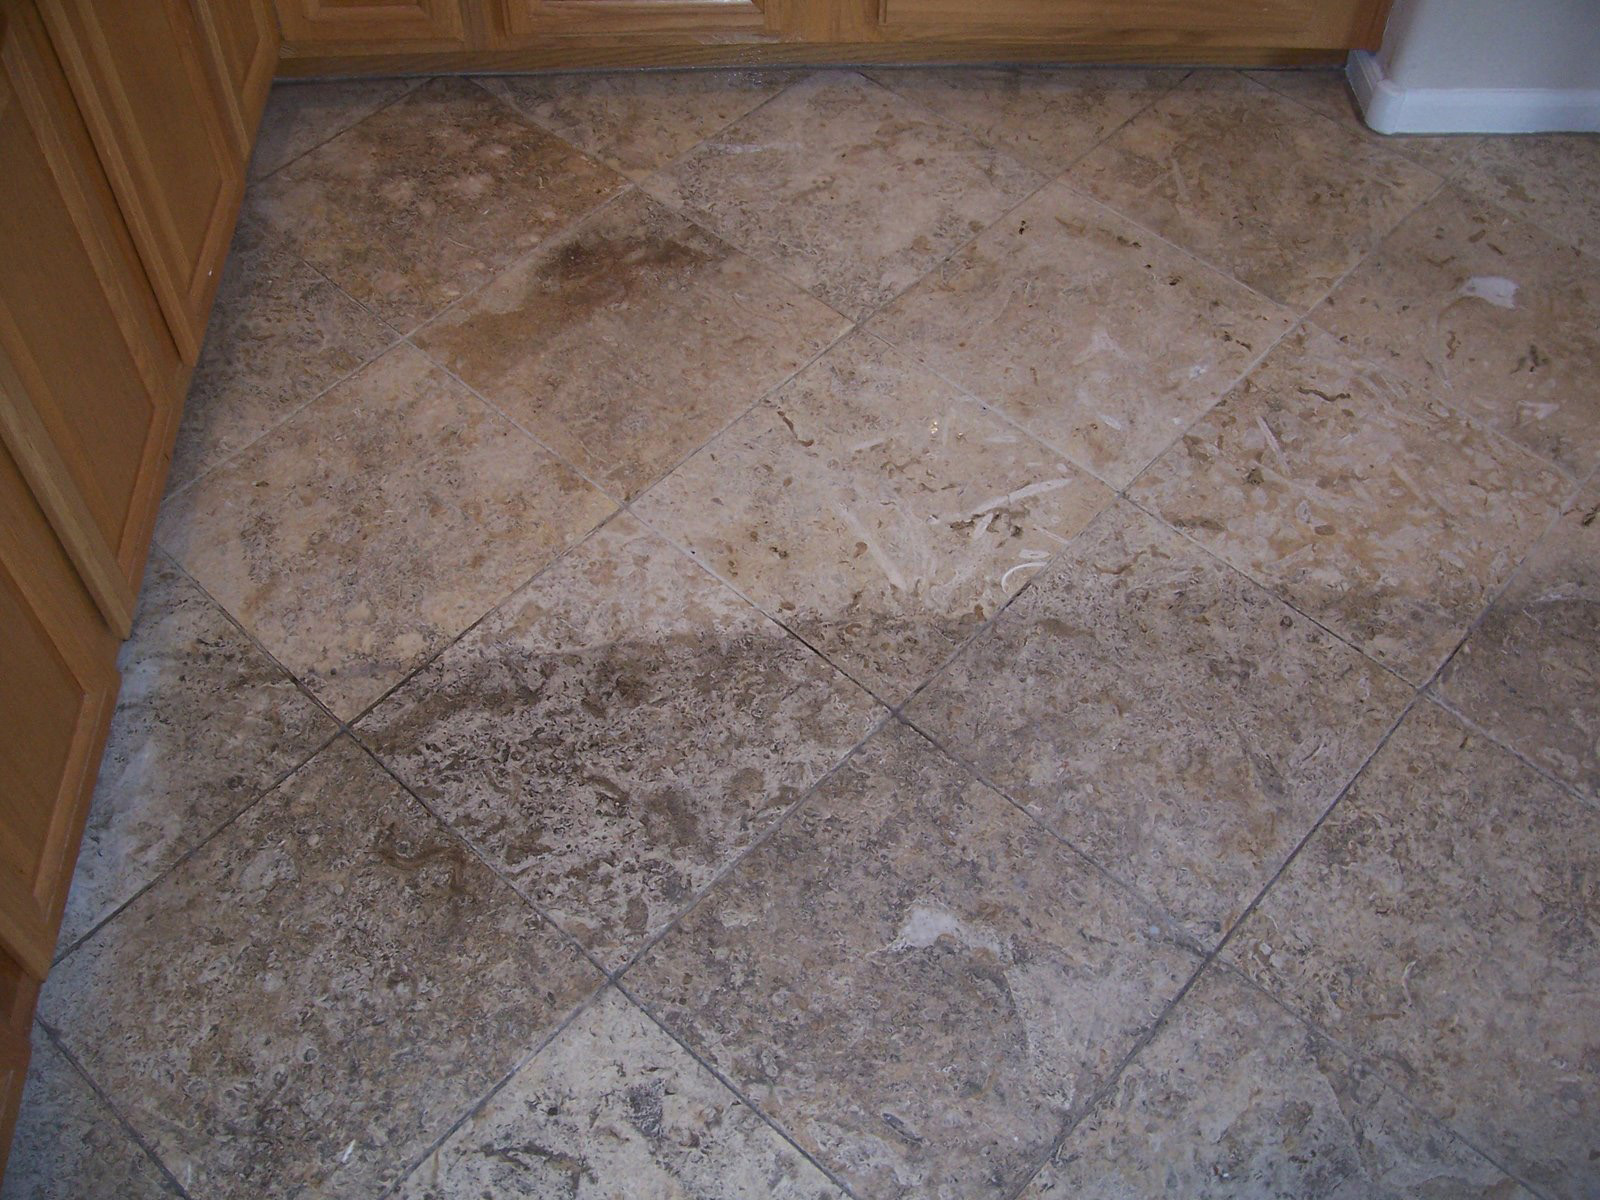 Cleaning Process | Photo Galleries | Baker's Travertine Power Clean